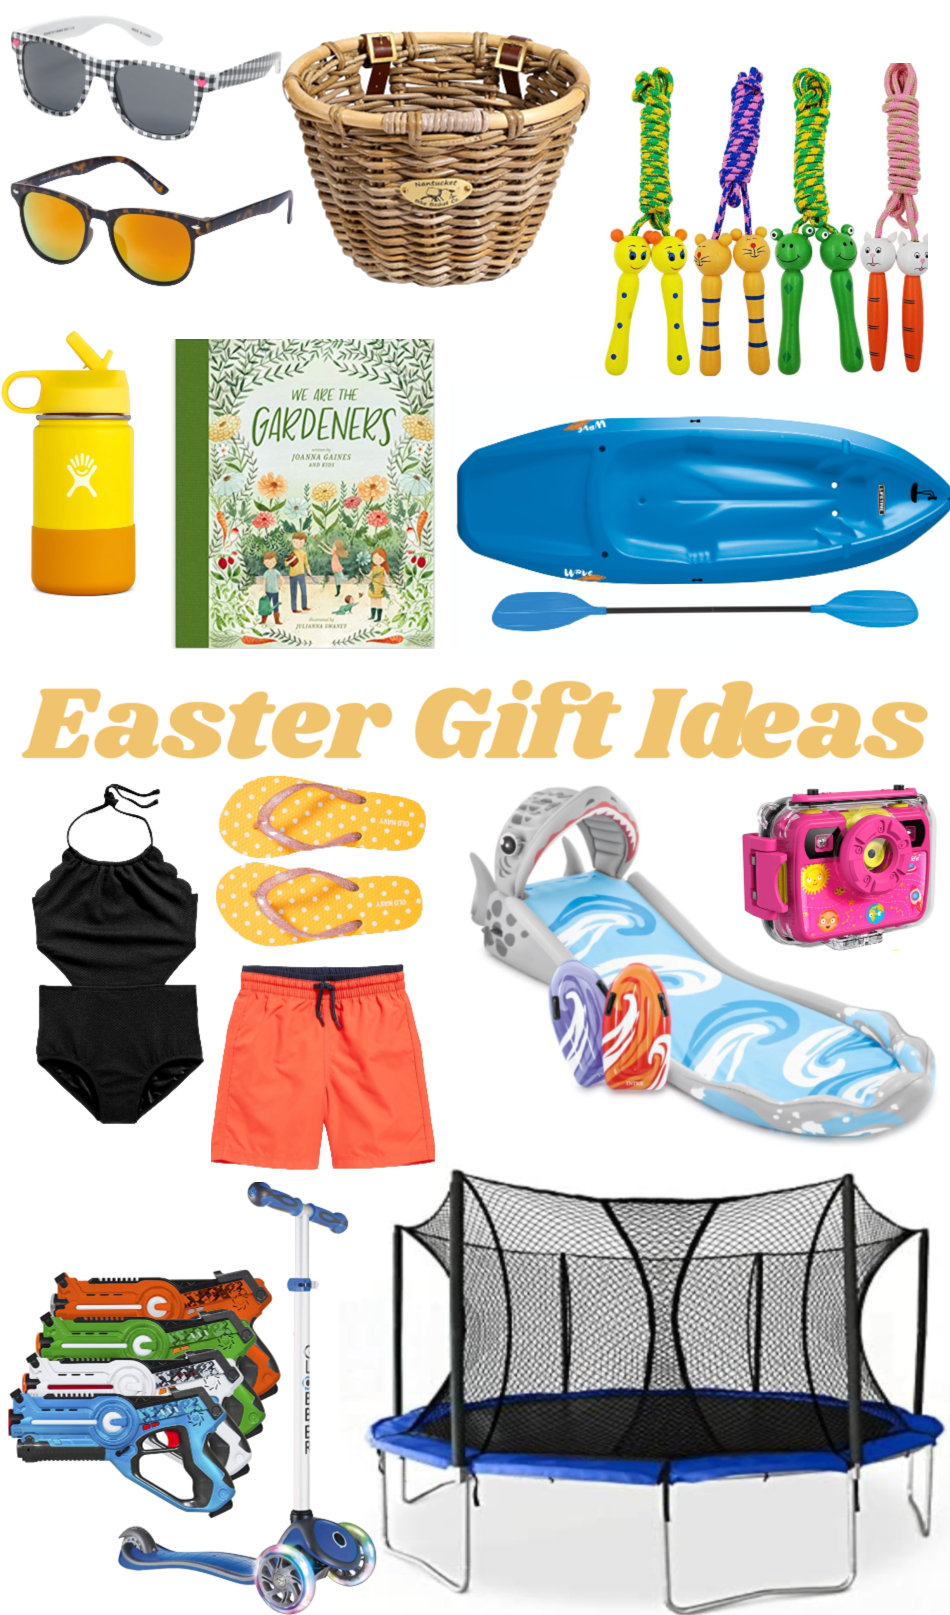 Easter Gift Ideas- Active Ideas for Kids